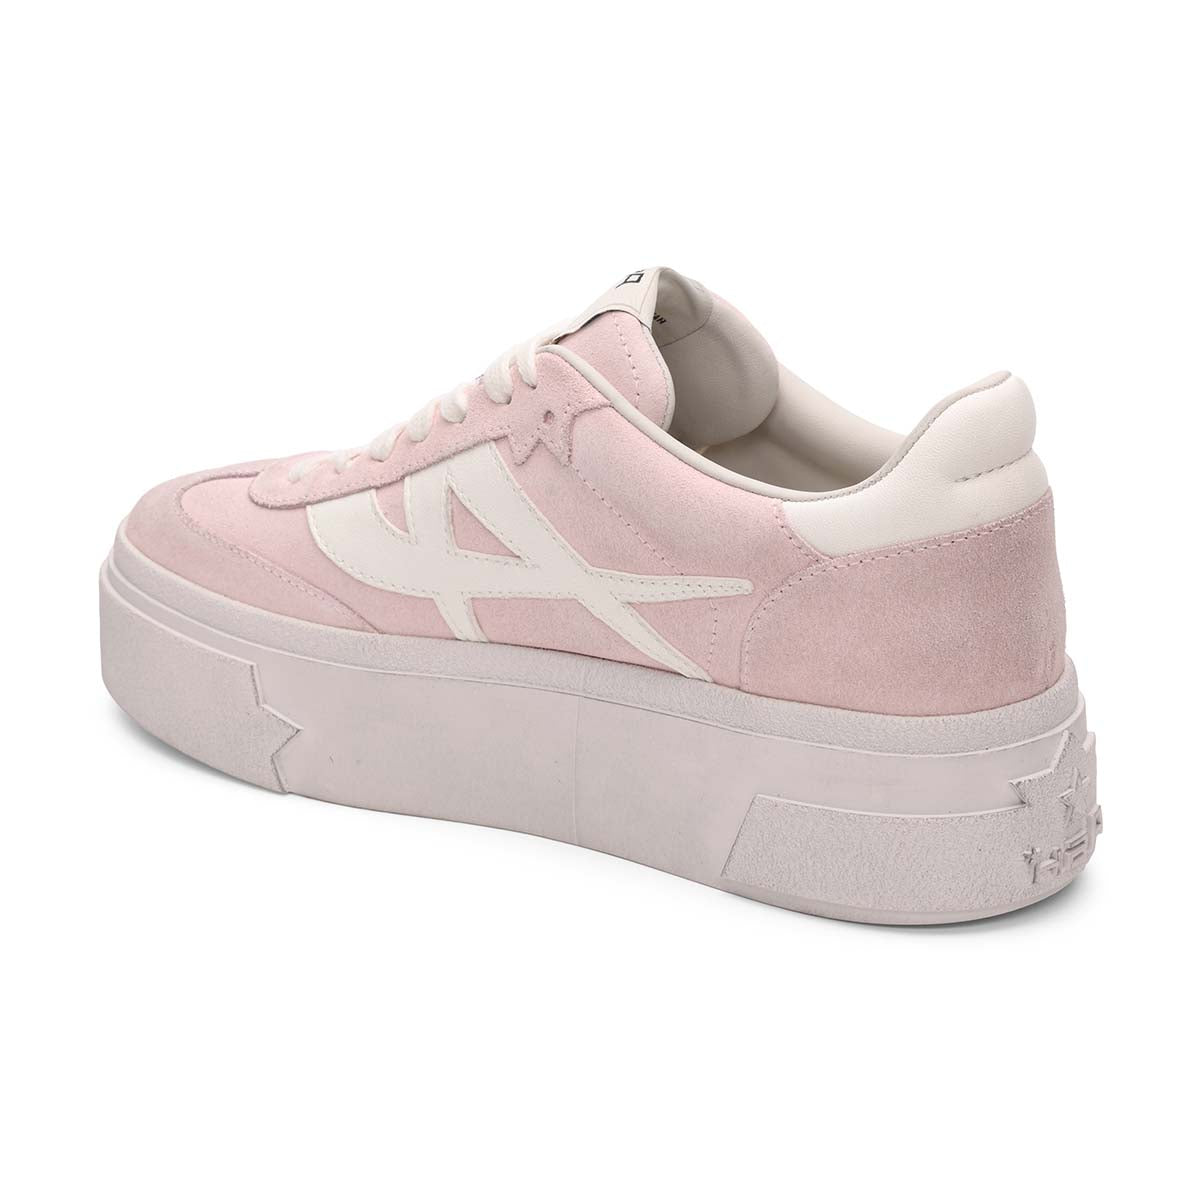 Starmoon Suede Platform Sneakers - Pink/White - 3/4 View - ASH